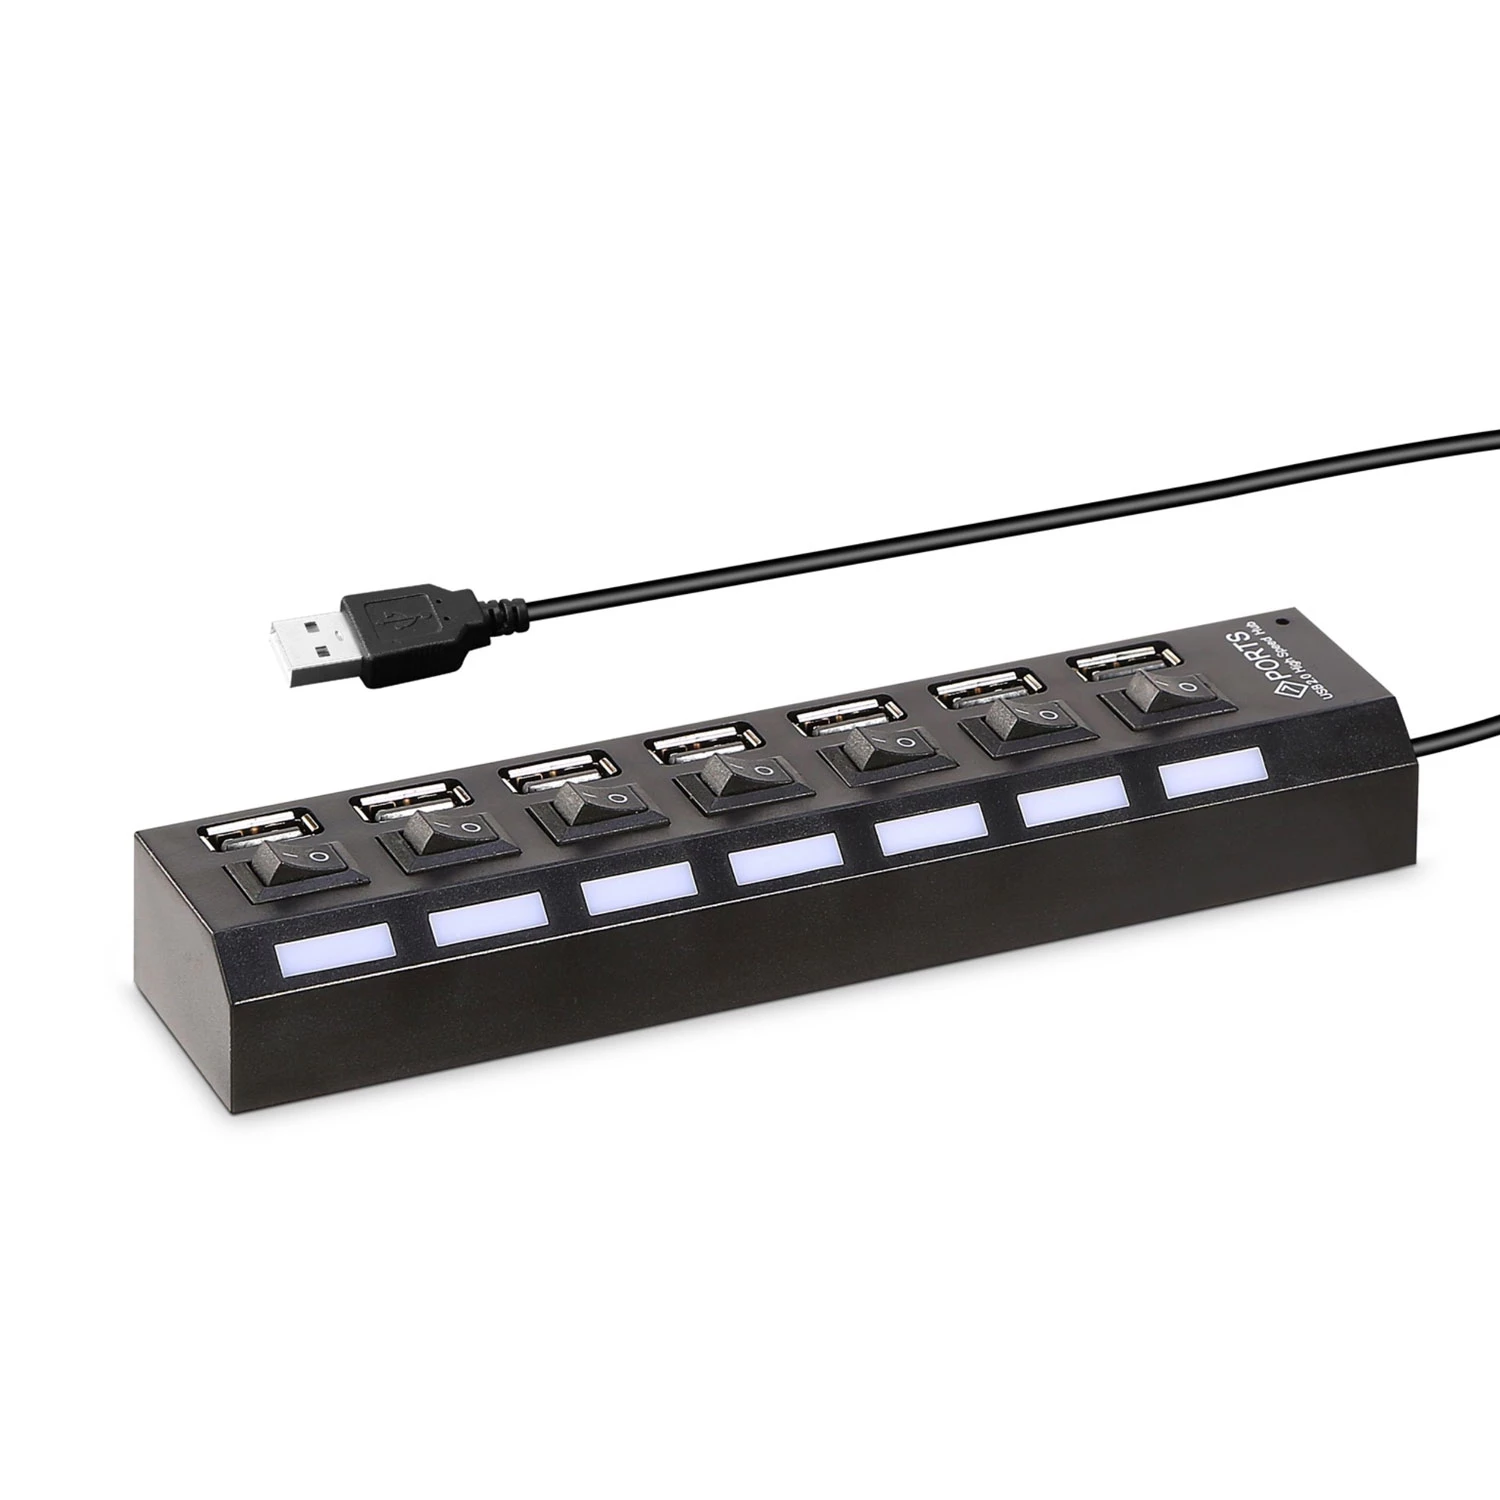 7 Port USB 2.0 Hub - High Speed Multiport with Individual Switches and LEDs